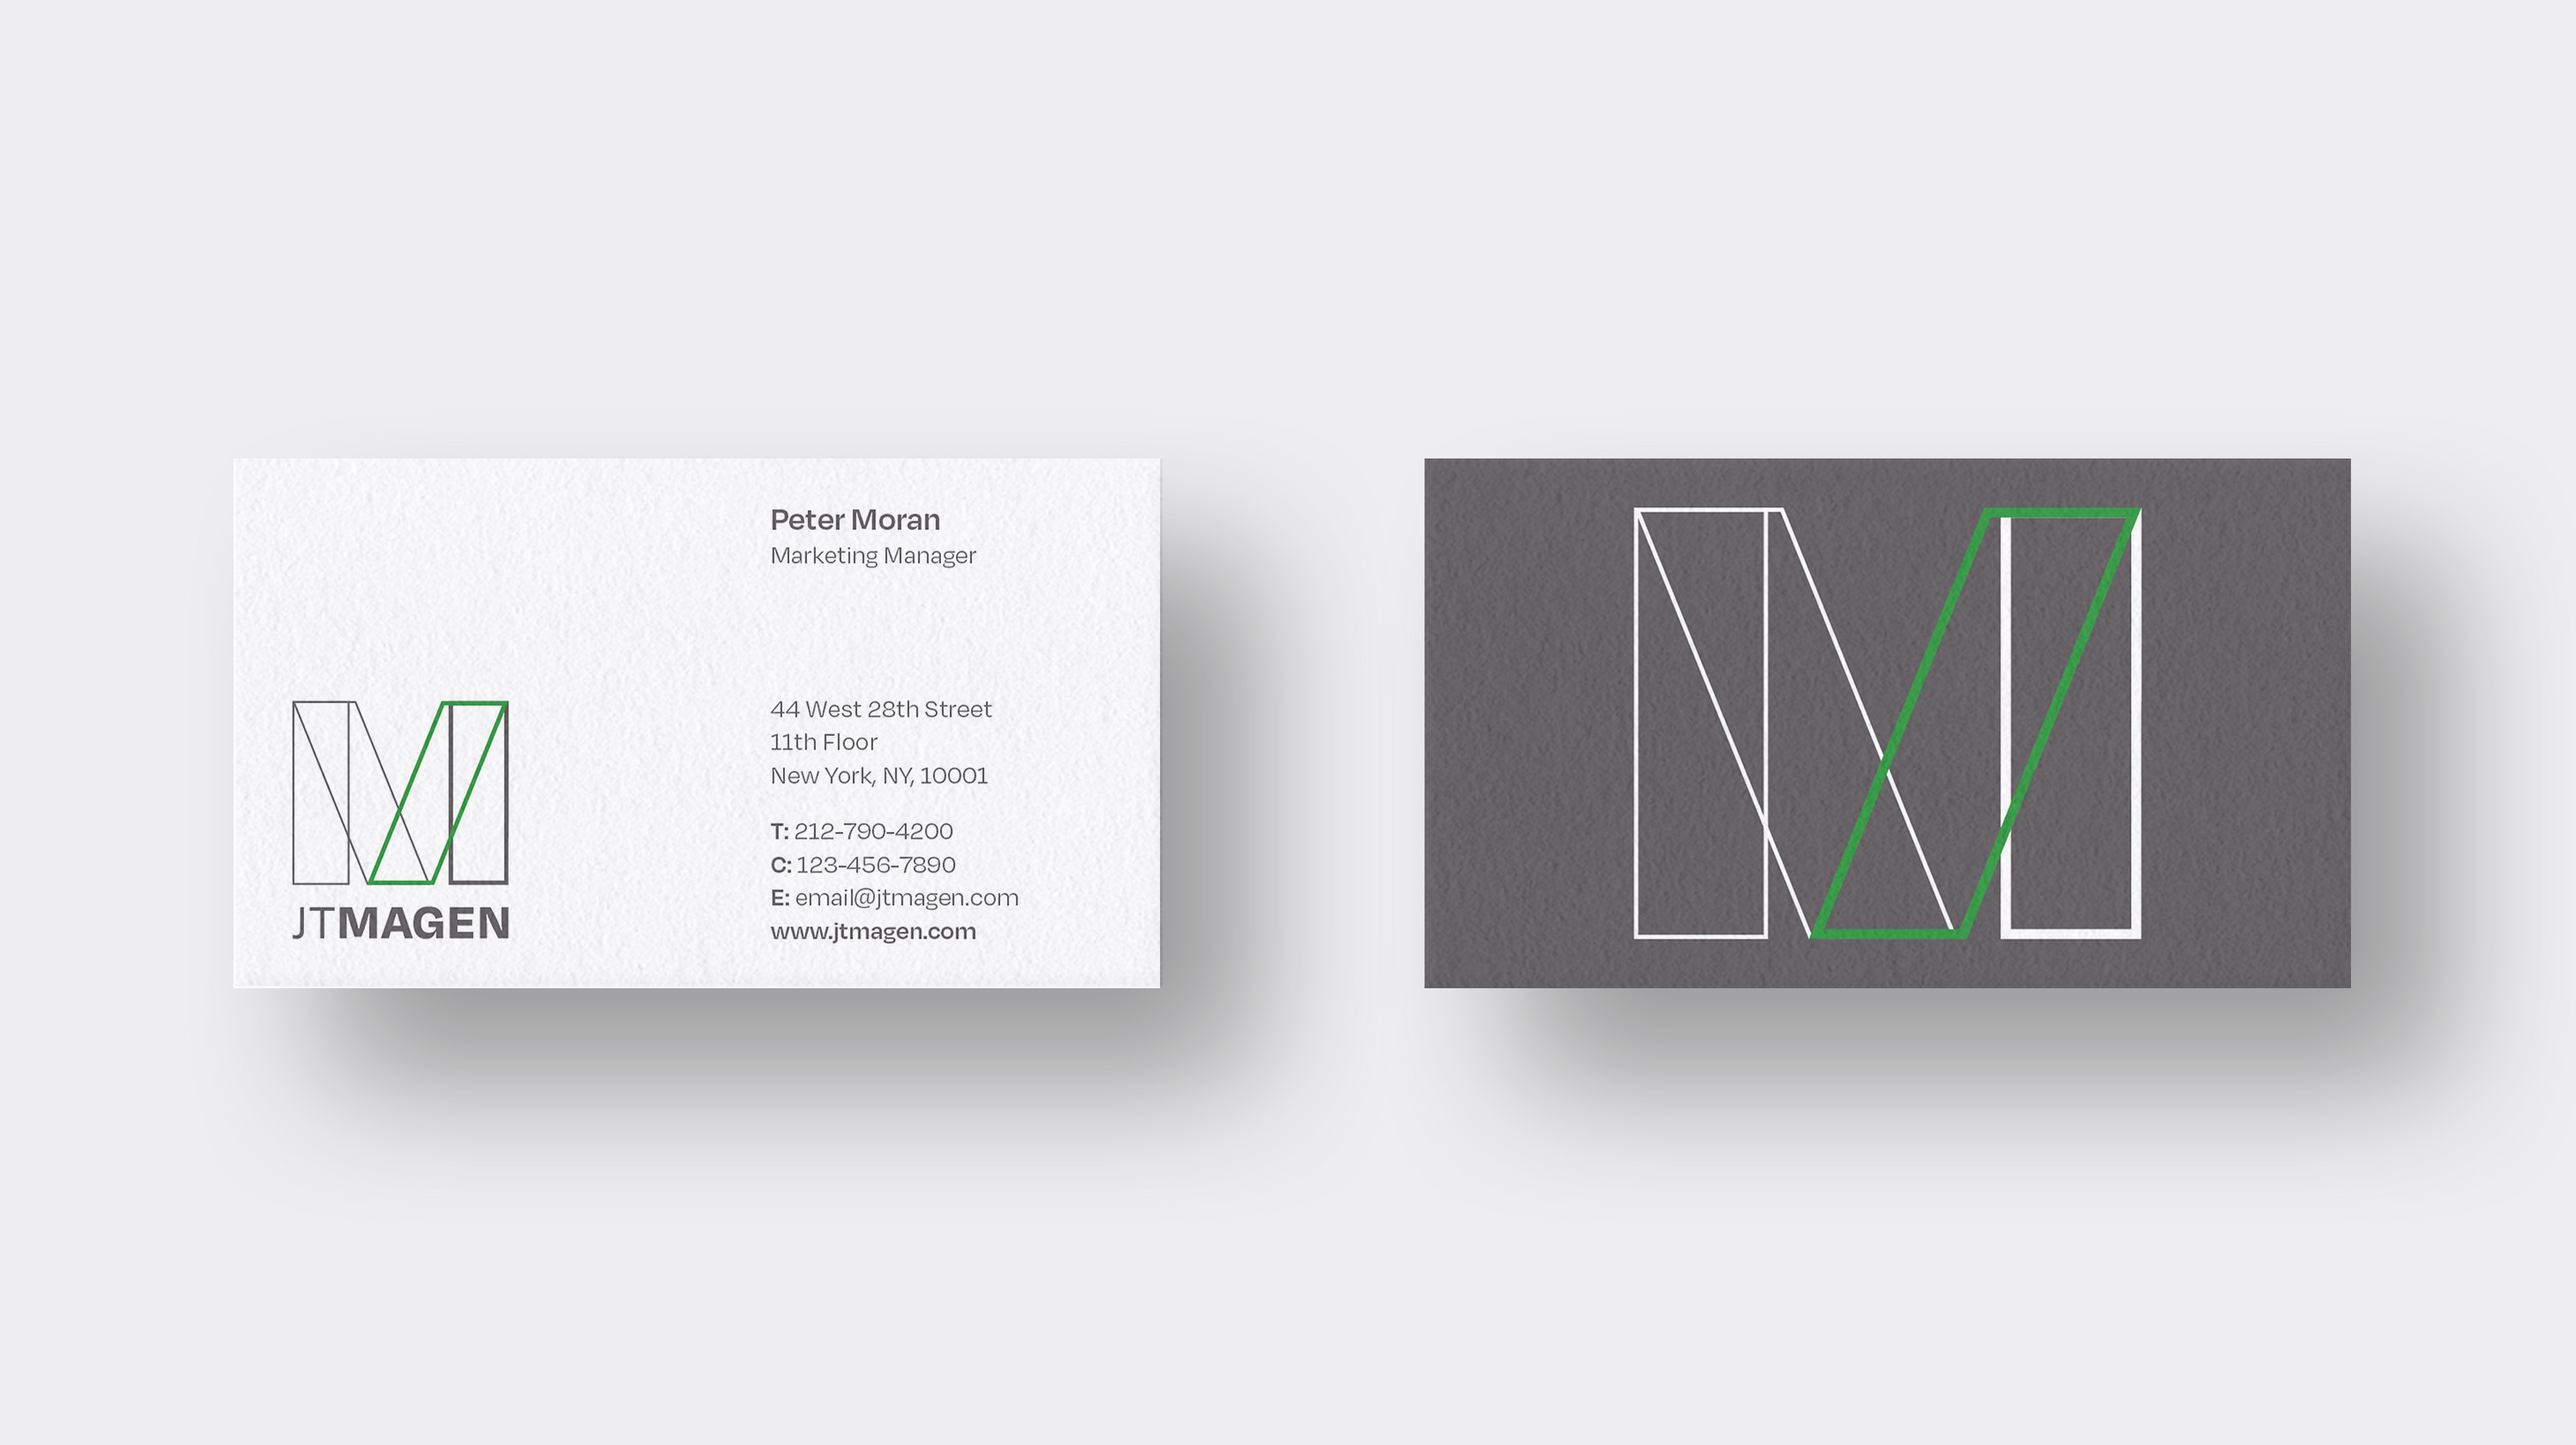 magen business card with logo on front and larger logo in grey on back